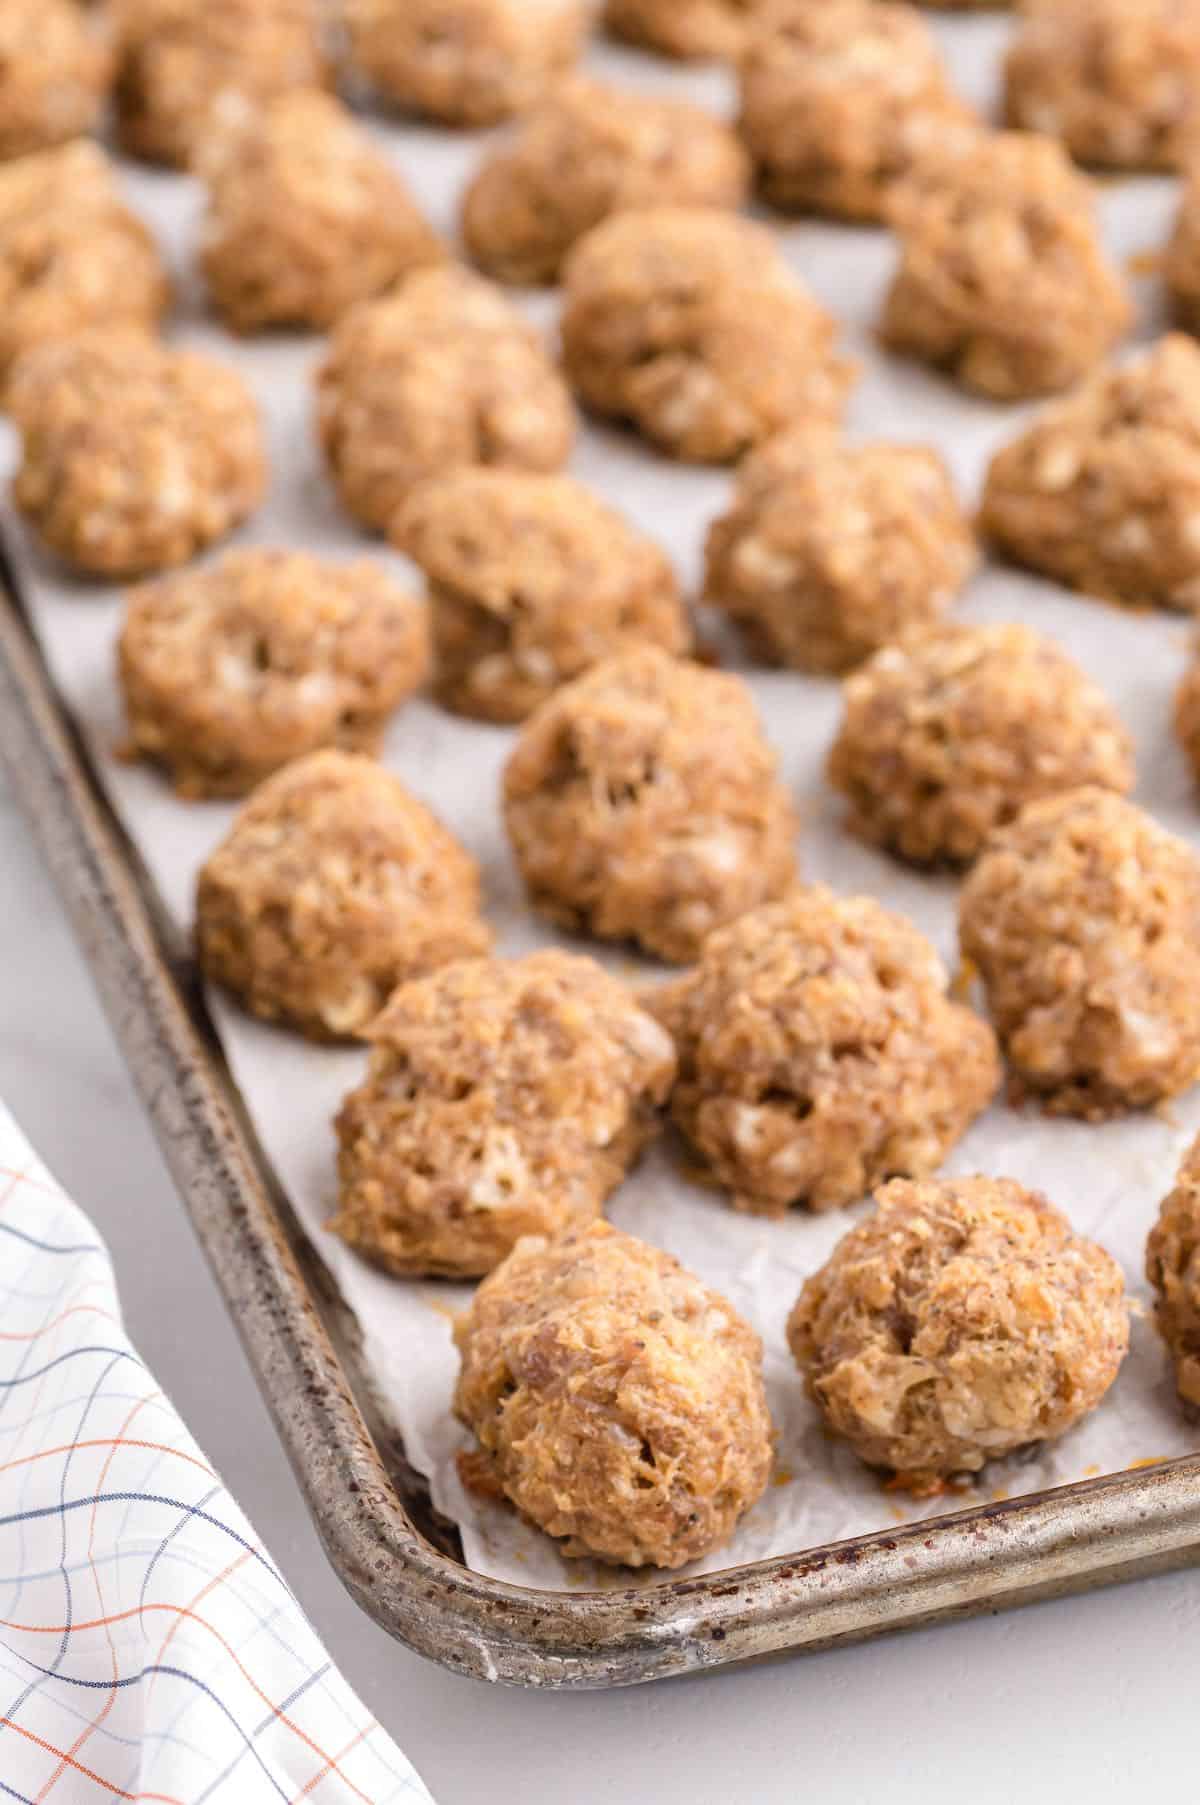 Sausage balls without bisquik baked on a cookie sheet in rows.